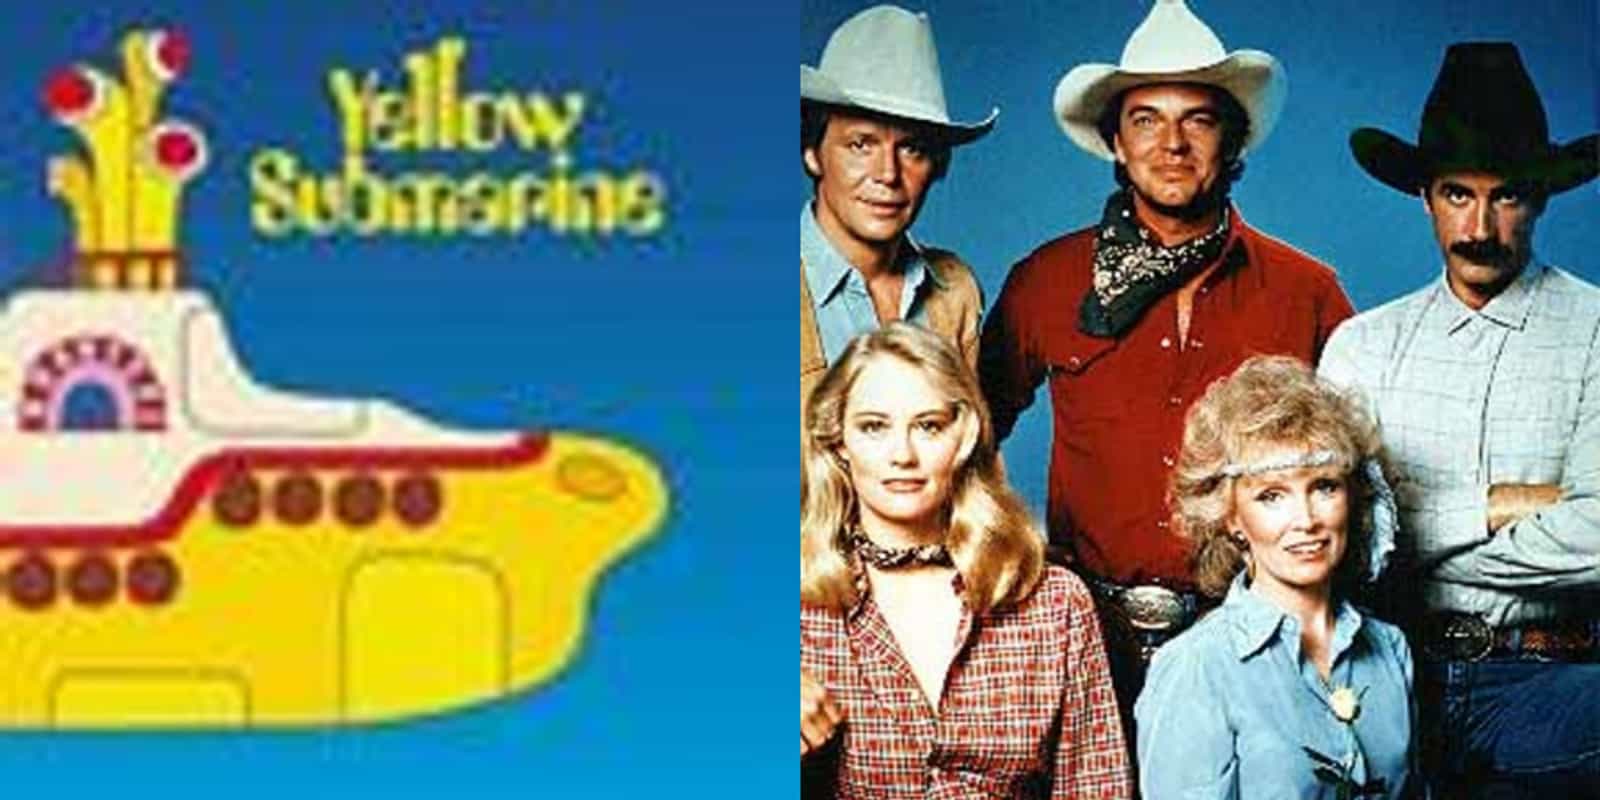 50+ Movies And Shows With Yellow In The Title